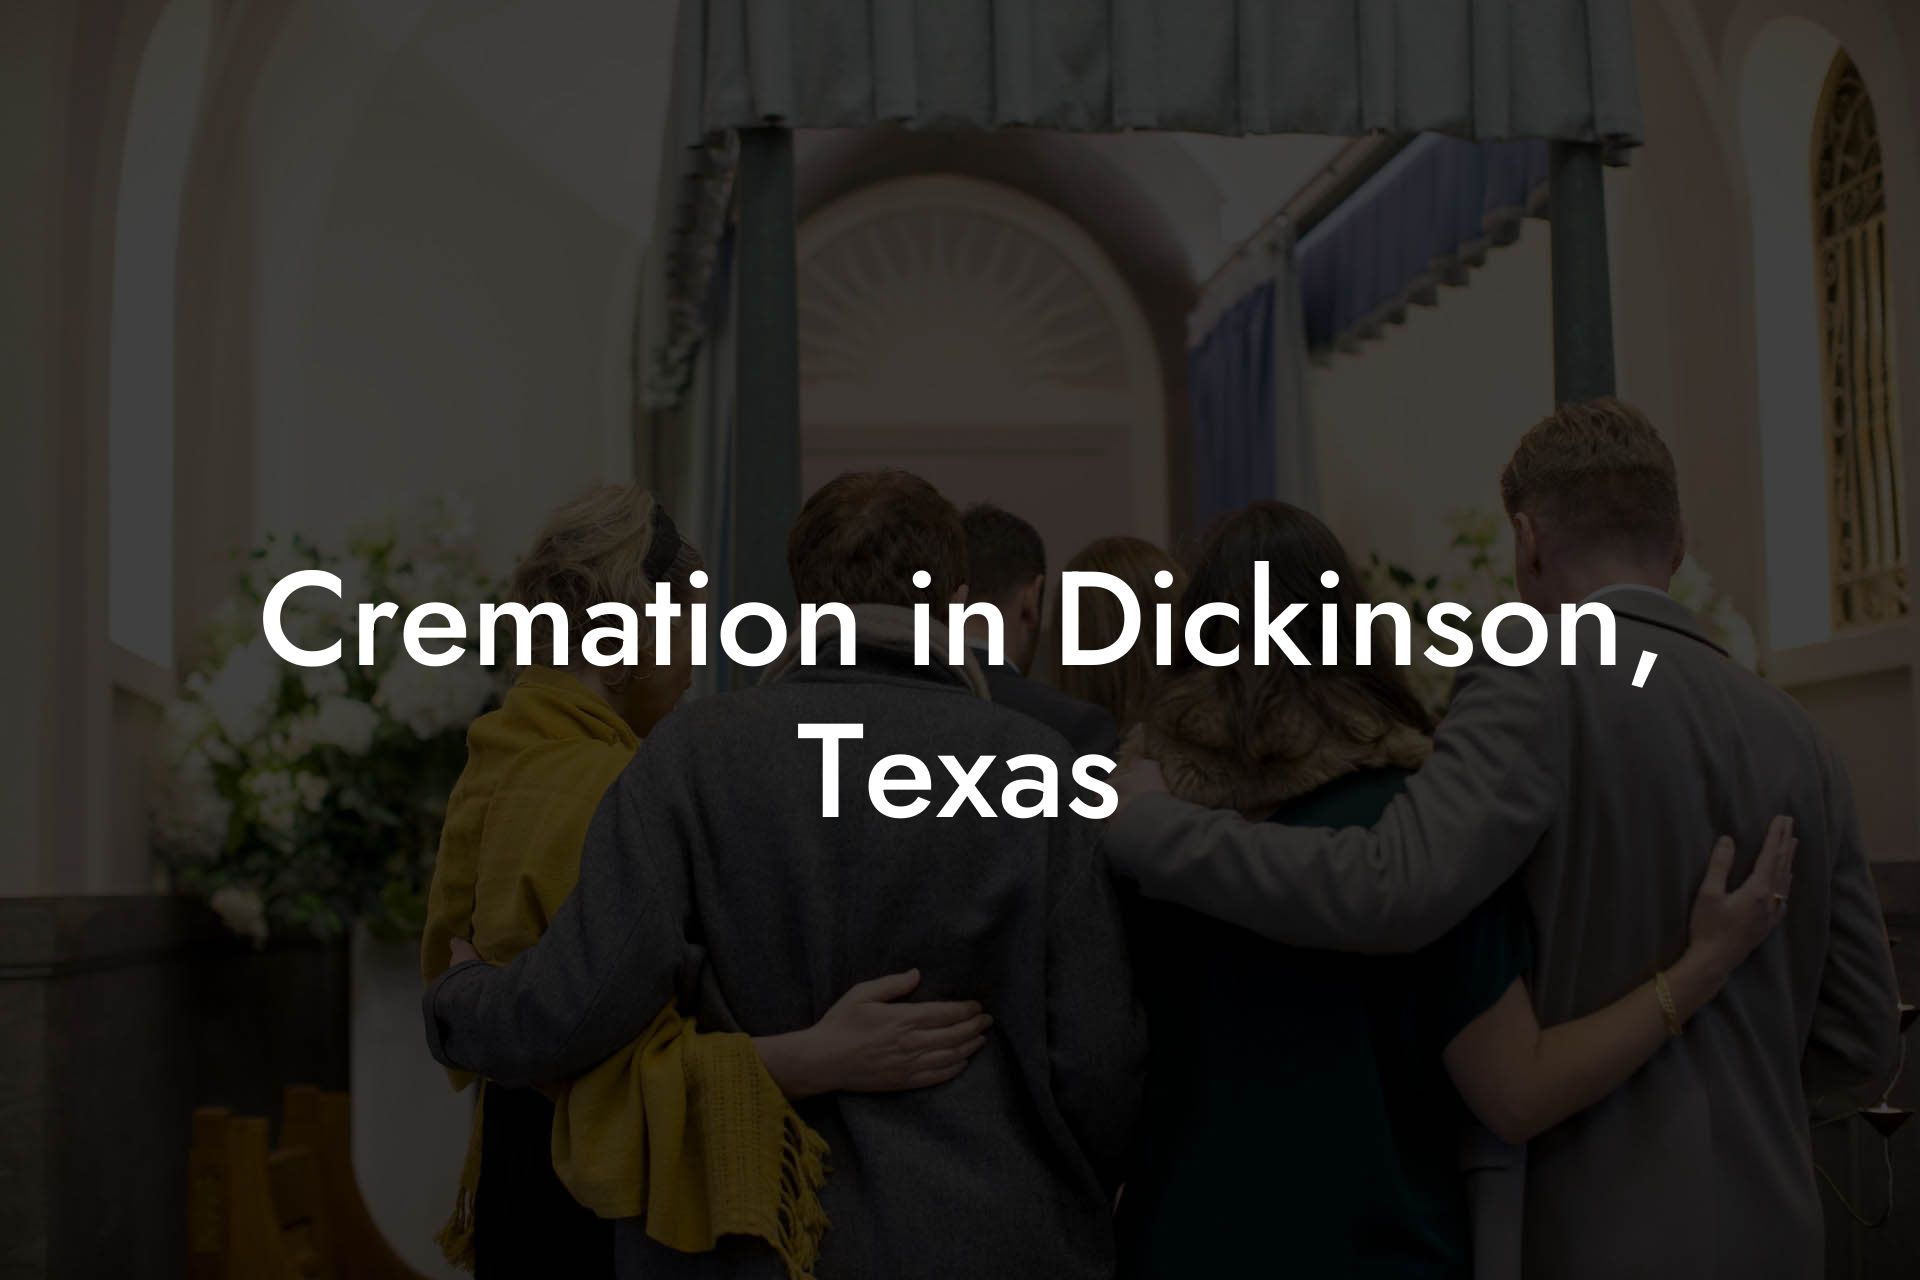 Cremation in Dickinson, Texas